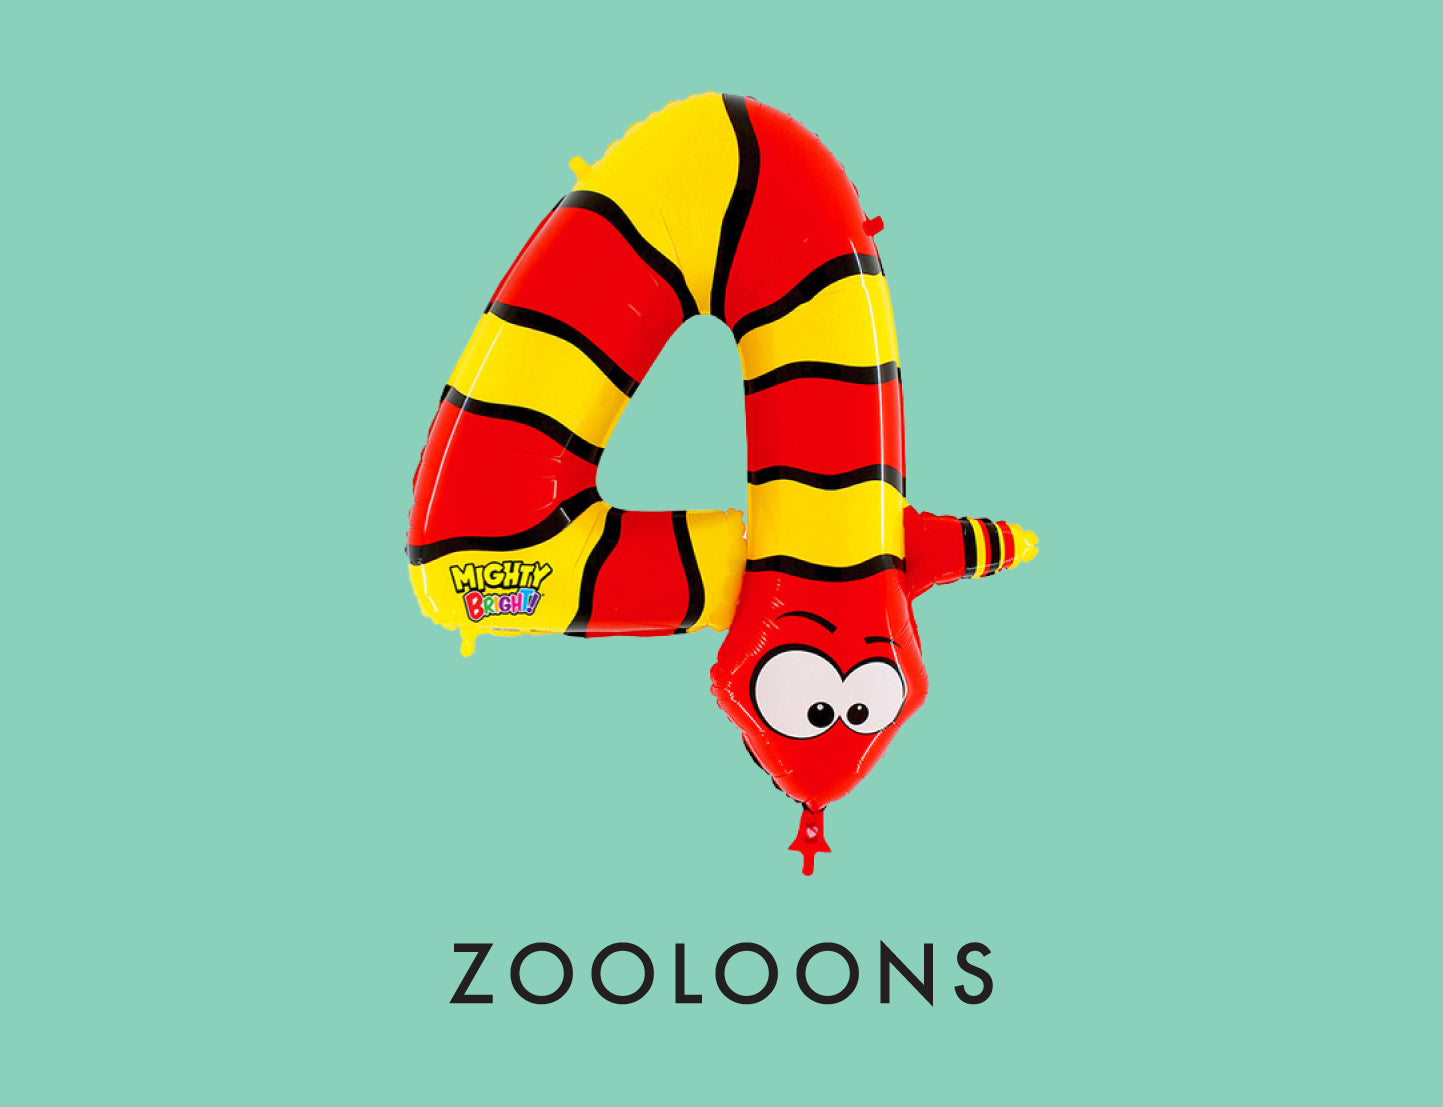 Zooloons